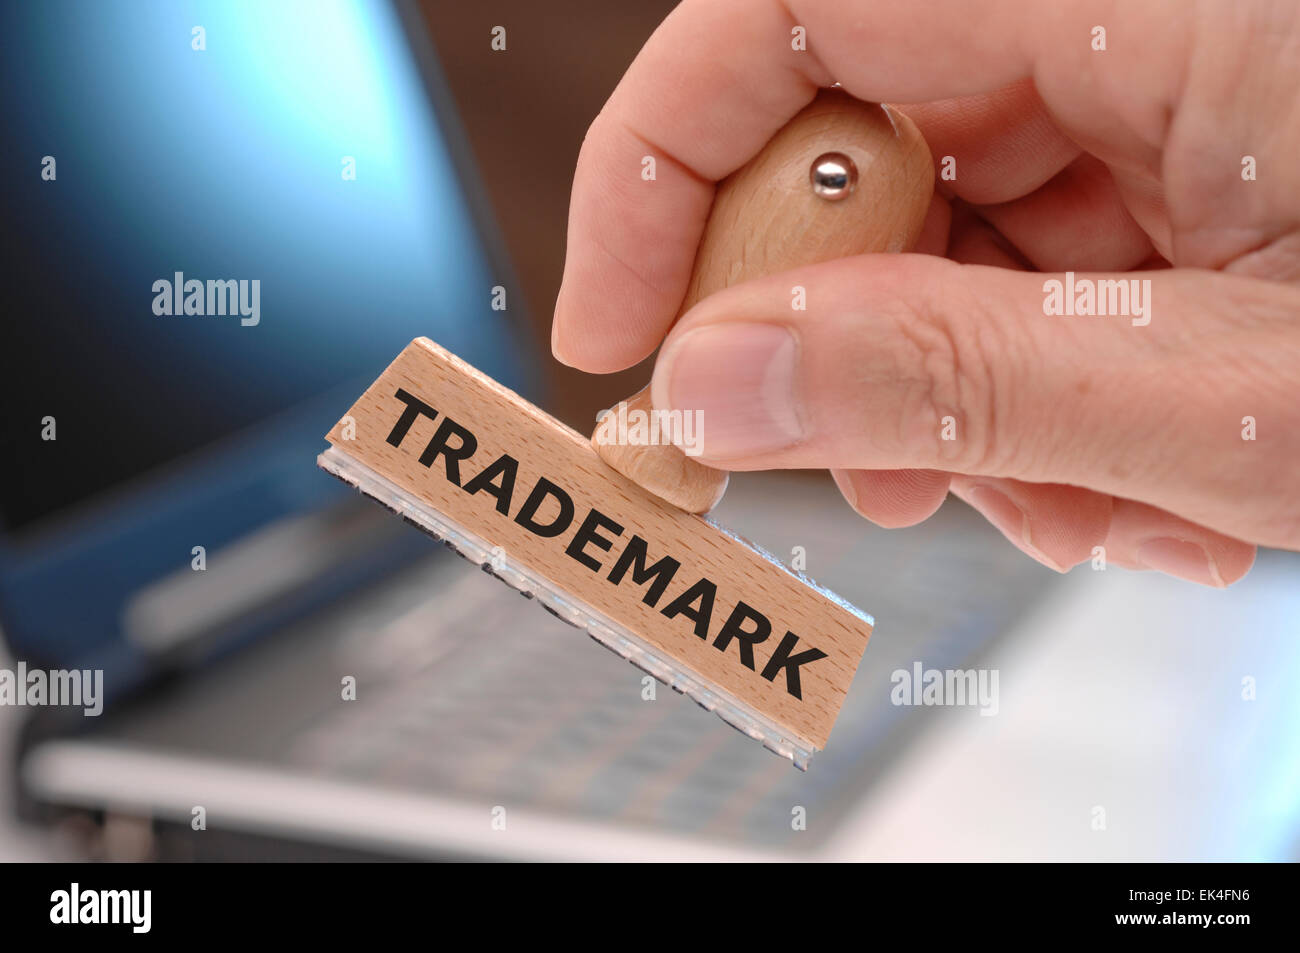 rubber stamp printed with trademark Stock Photo